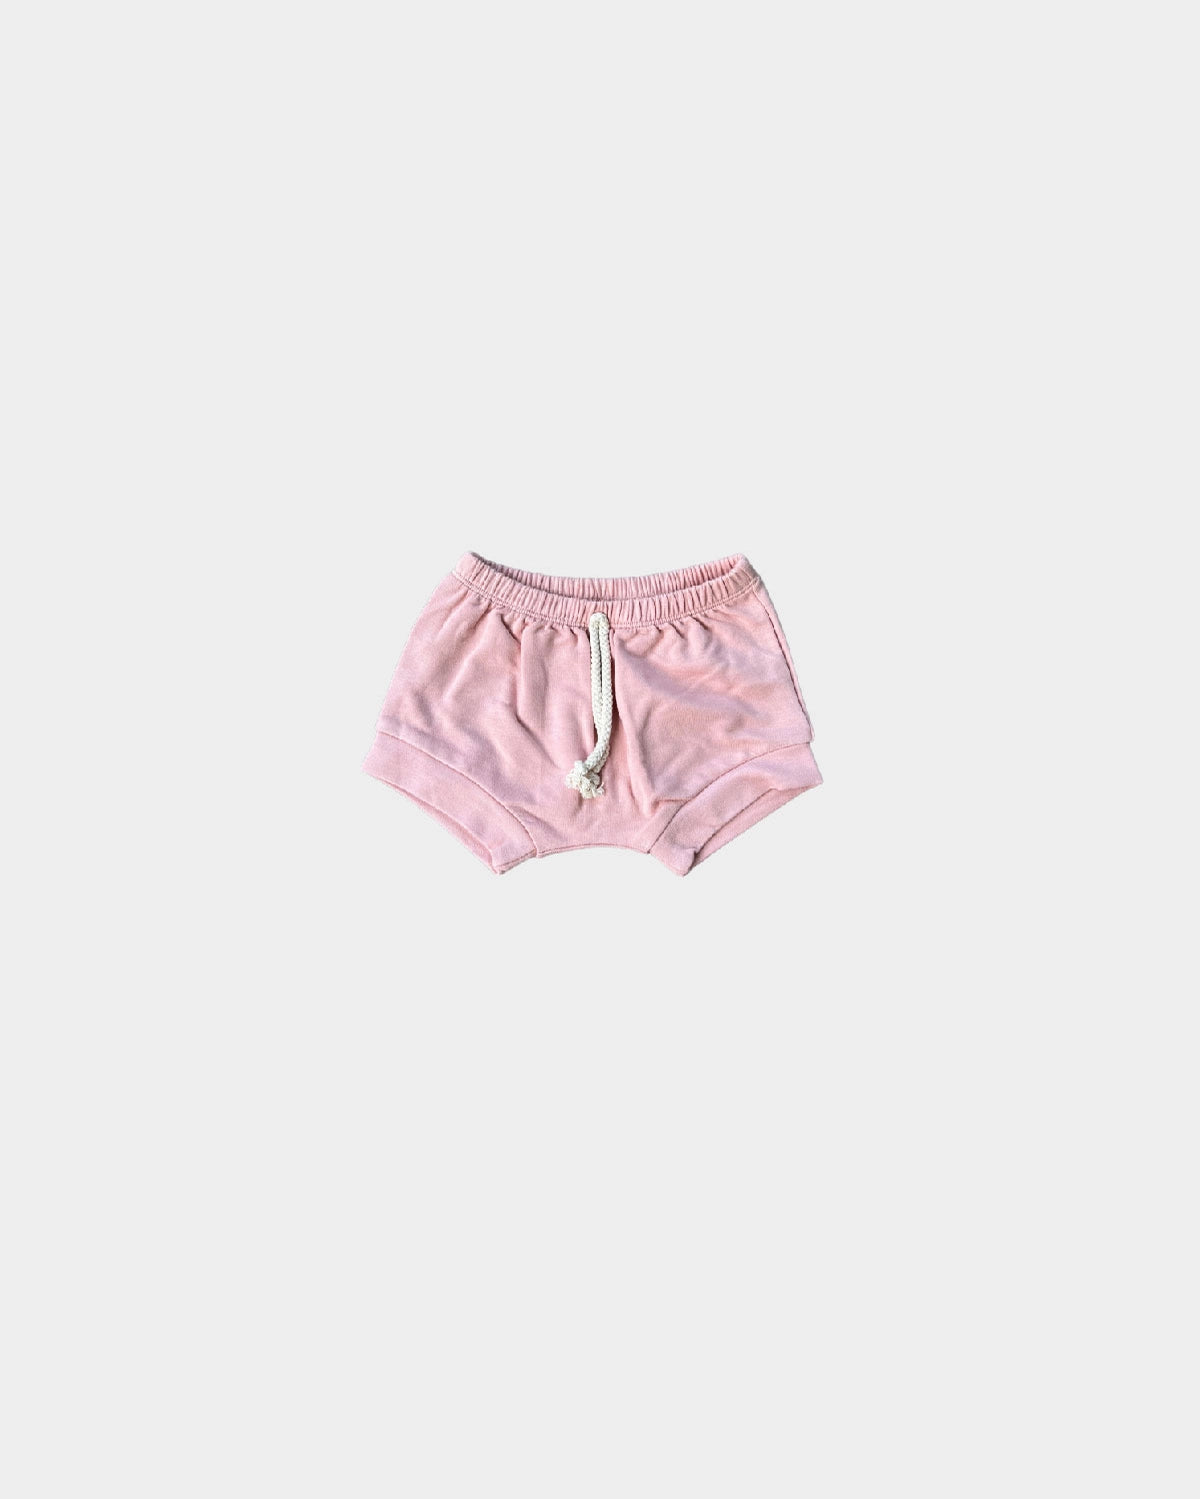 bamboo cotton pink shorts baby sprouts